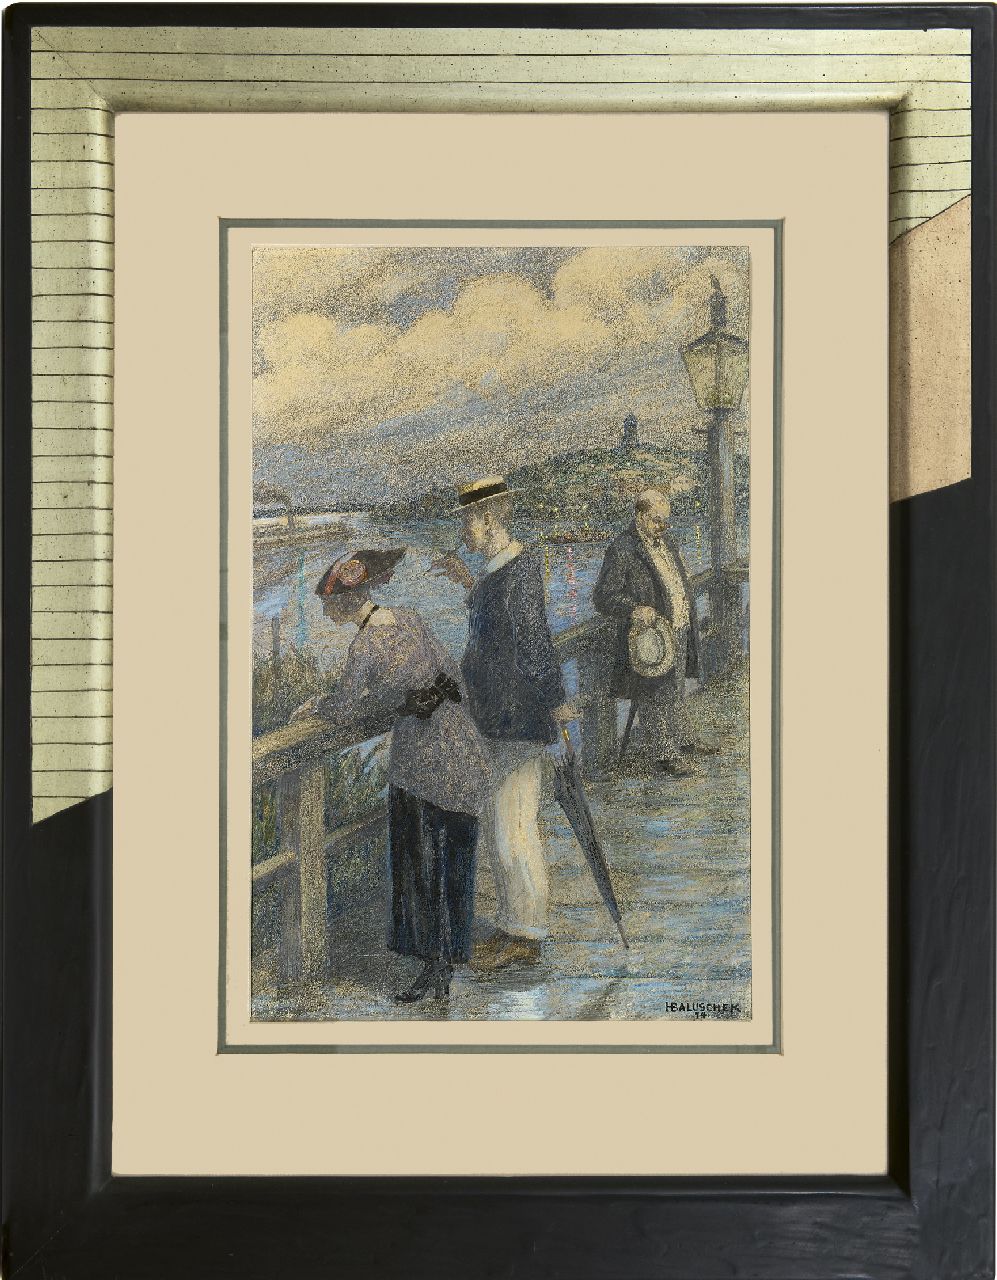 Baluschek H.  | Hans Baluschek, Couple on the bridge, chalk and gouache on paper 48.5 x 33.0 cm, signed l.r. and dated '14